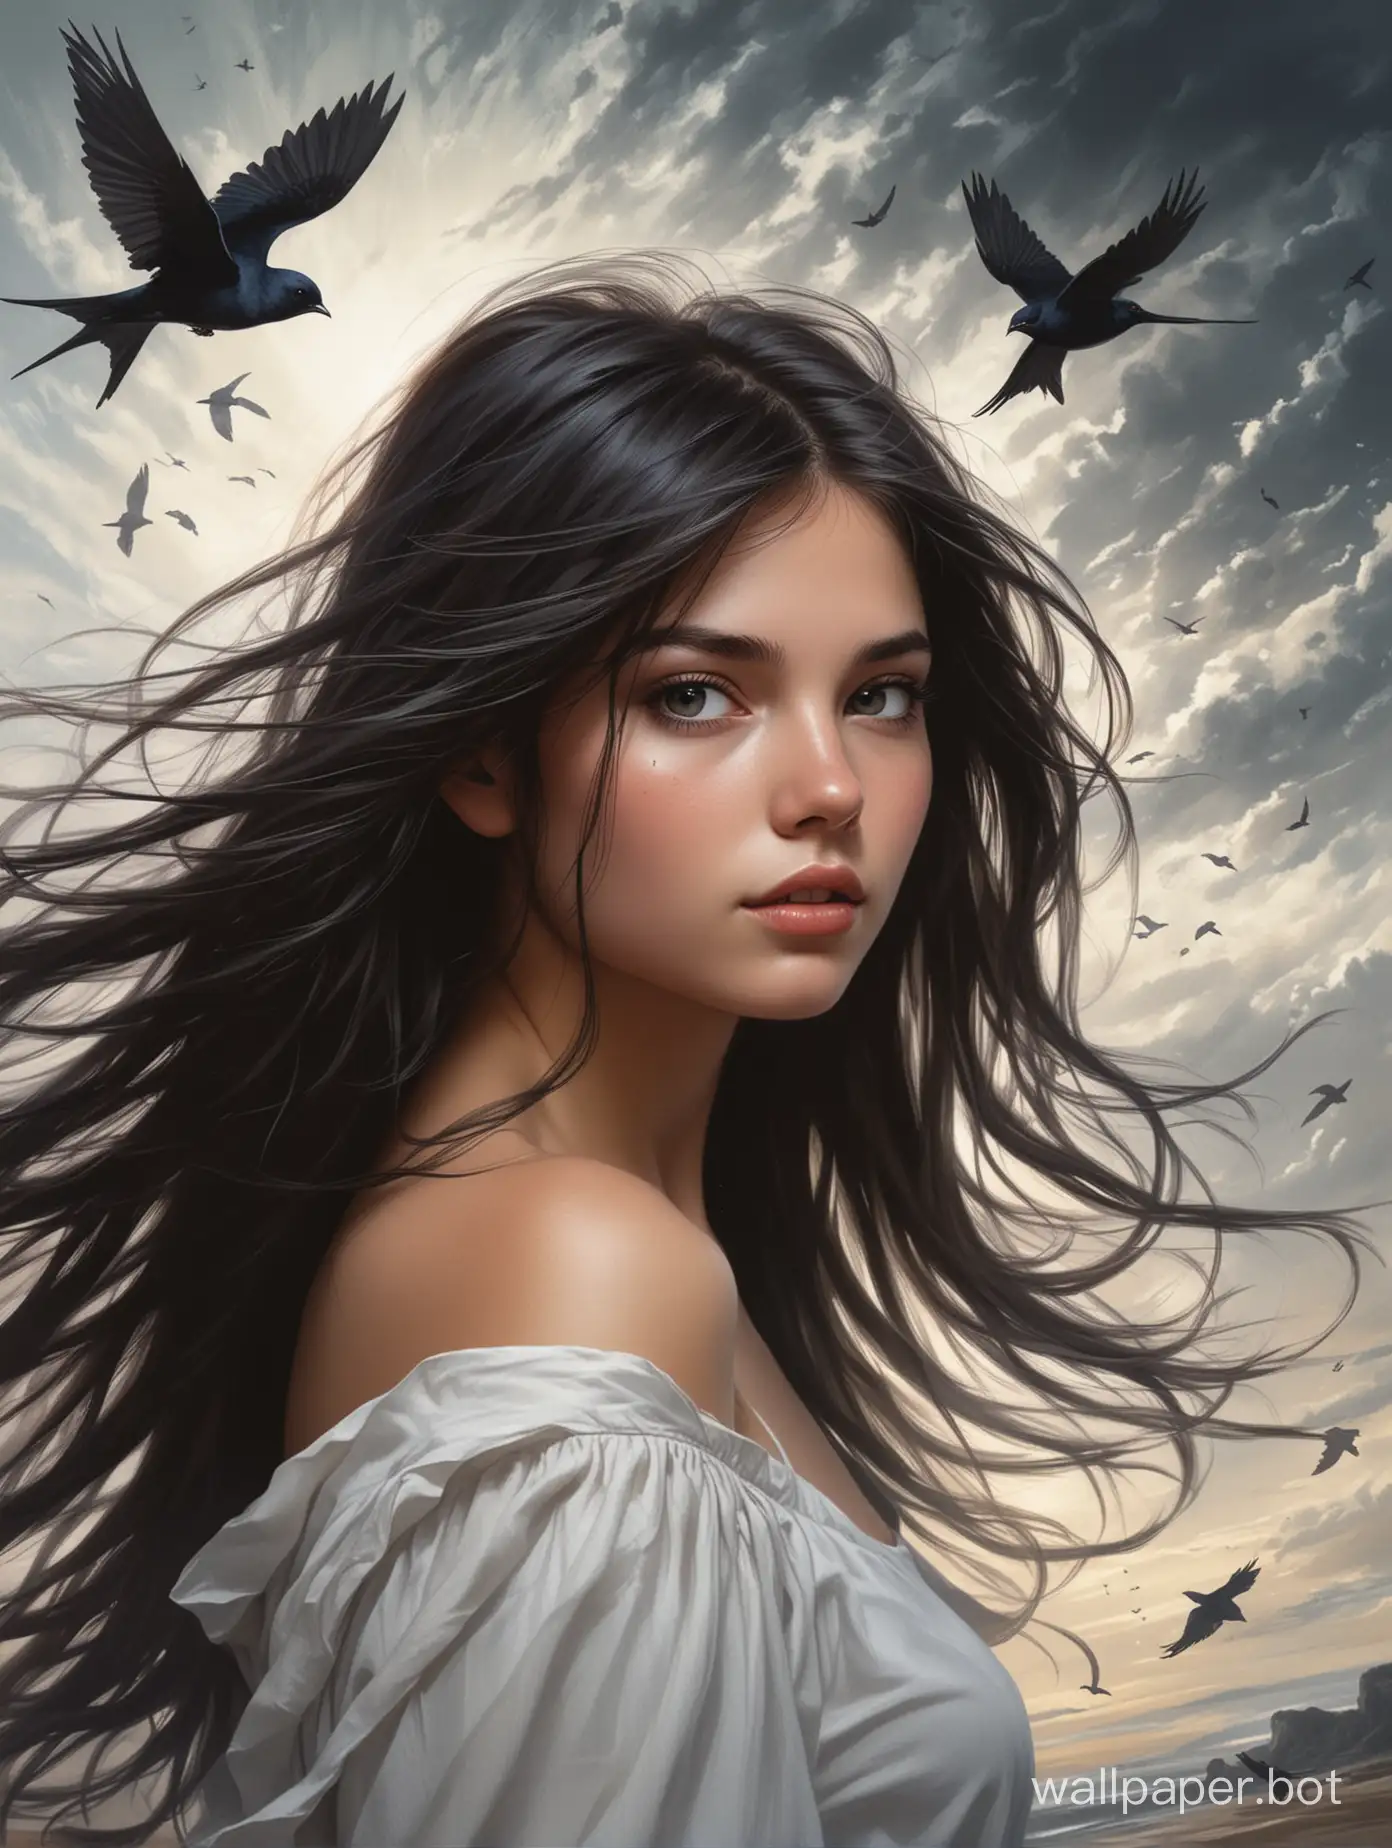 The main element of the cover is a large portrait of a 19-year-old girl with long dark hair. The hair flows freely over her shoulders and back, creating a sense of movement. The wind gently sways her hair, giving her a dynamic and light appearance. The girl's eyes are half-closed, giving her a pensive and mysterious look. In the background, there are undefined shadows hinting at the secrets and dangers that lie ahead. A small silhouette of a swallow, hovering in the upper right corner, is a subtle hint at the theme of freedom and hope that runs through the book.